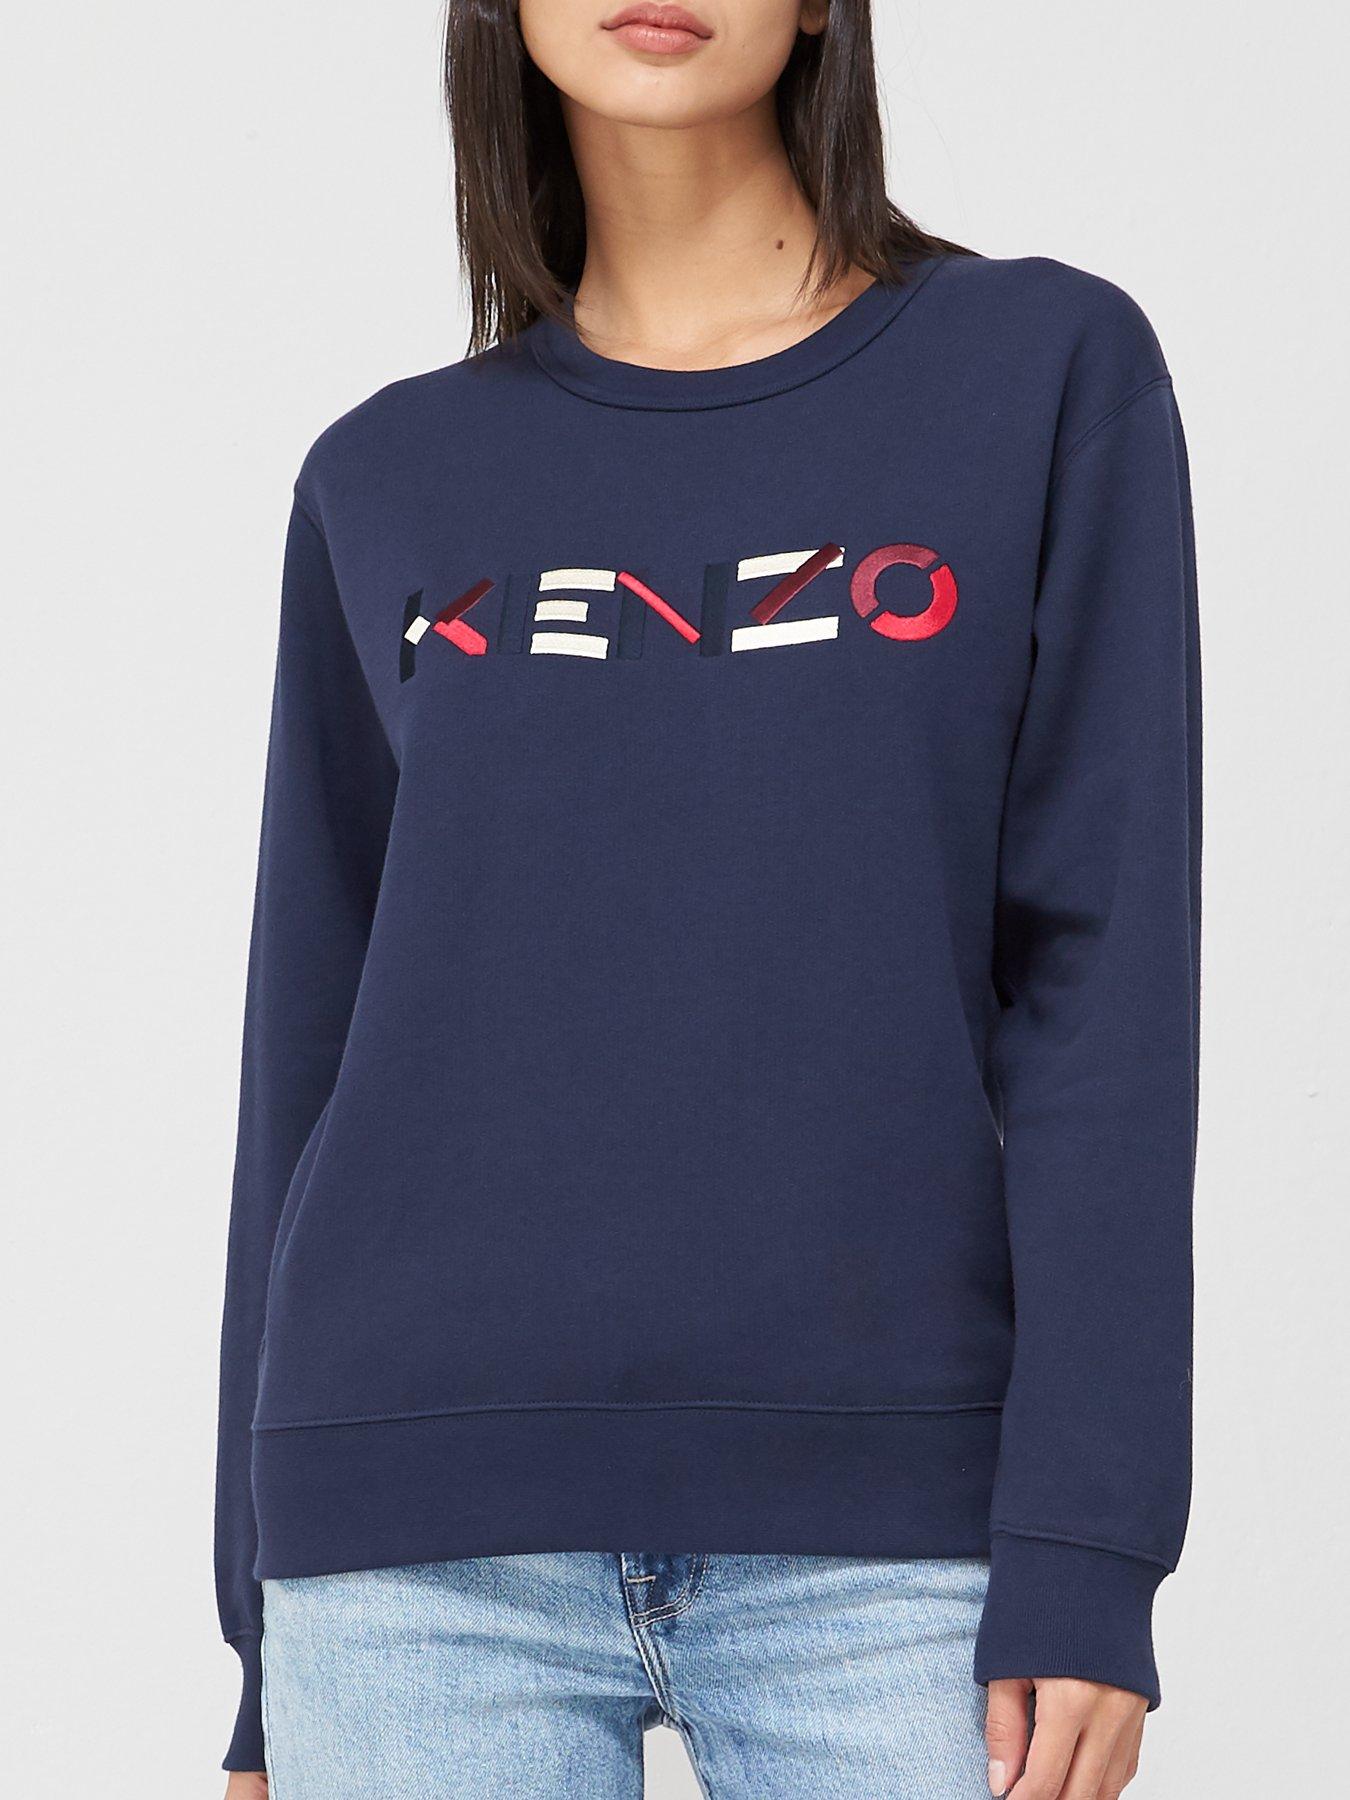 grey and blue kenzo jumper